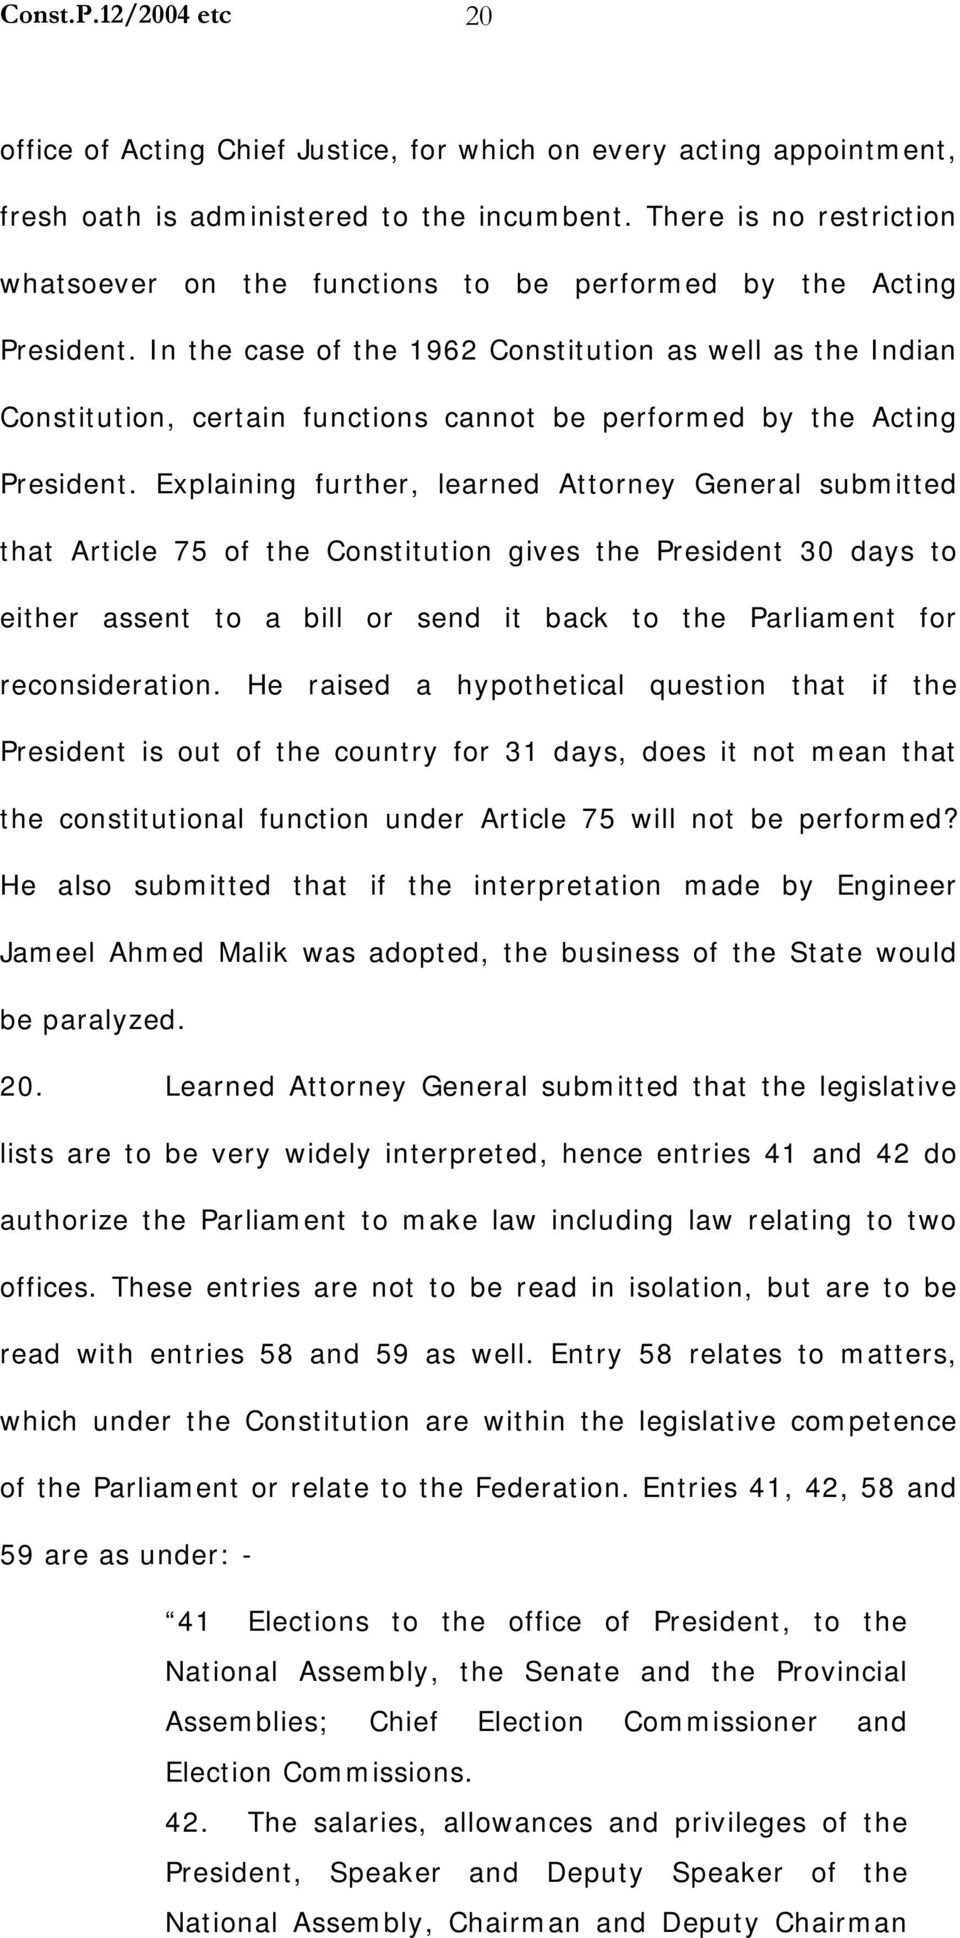 In the case of the 1962 Constitution as well as the Indian Constitution, certain functions cannot be performed by the Acting President.